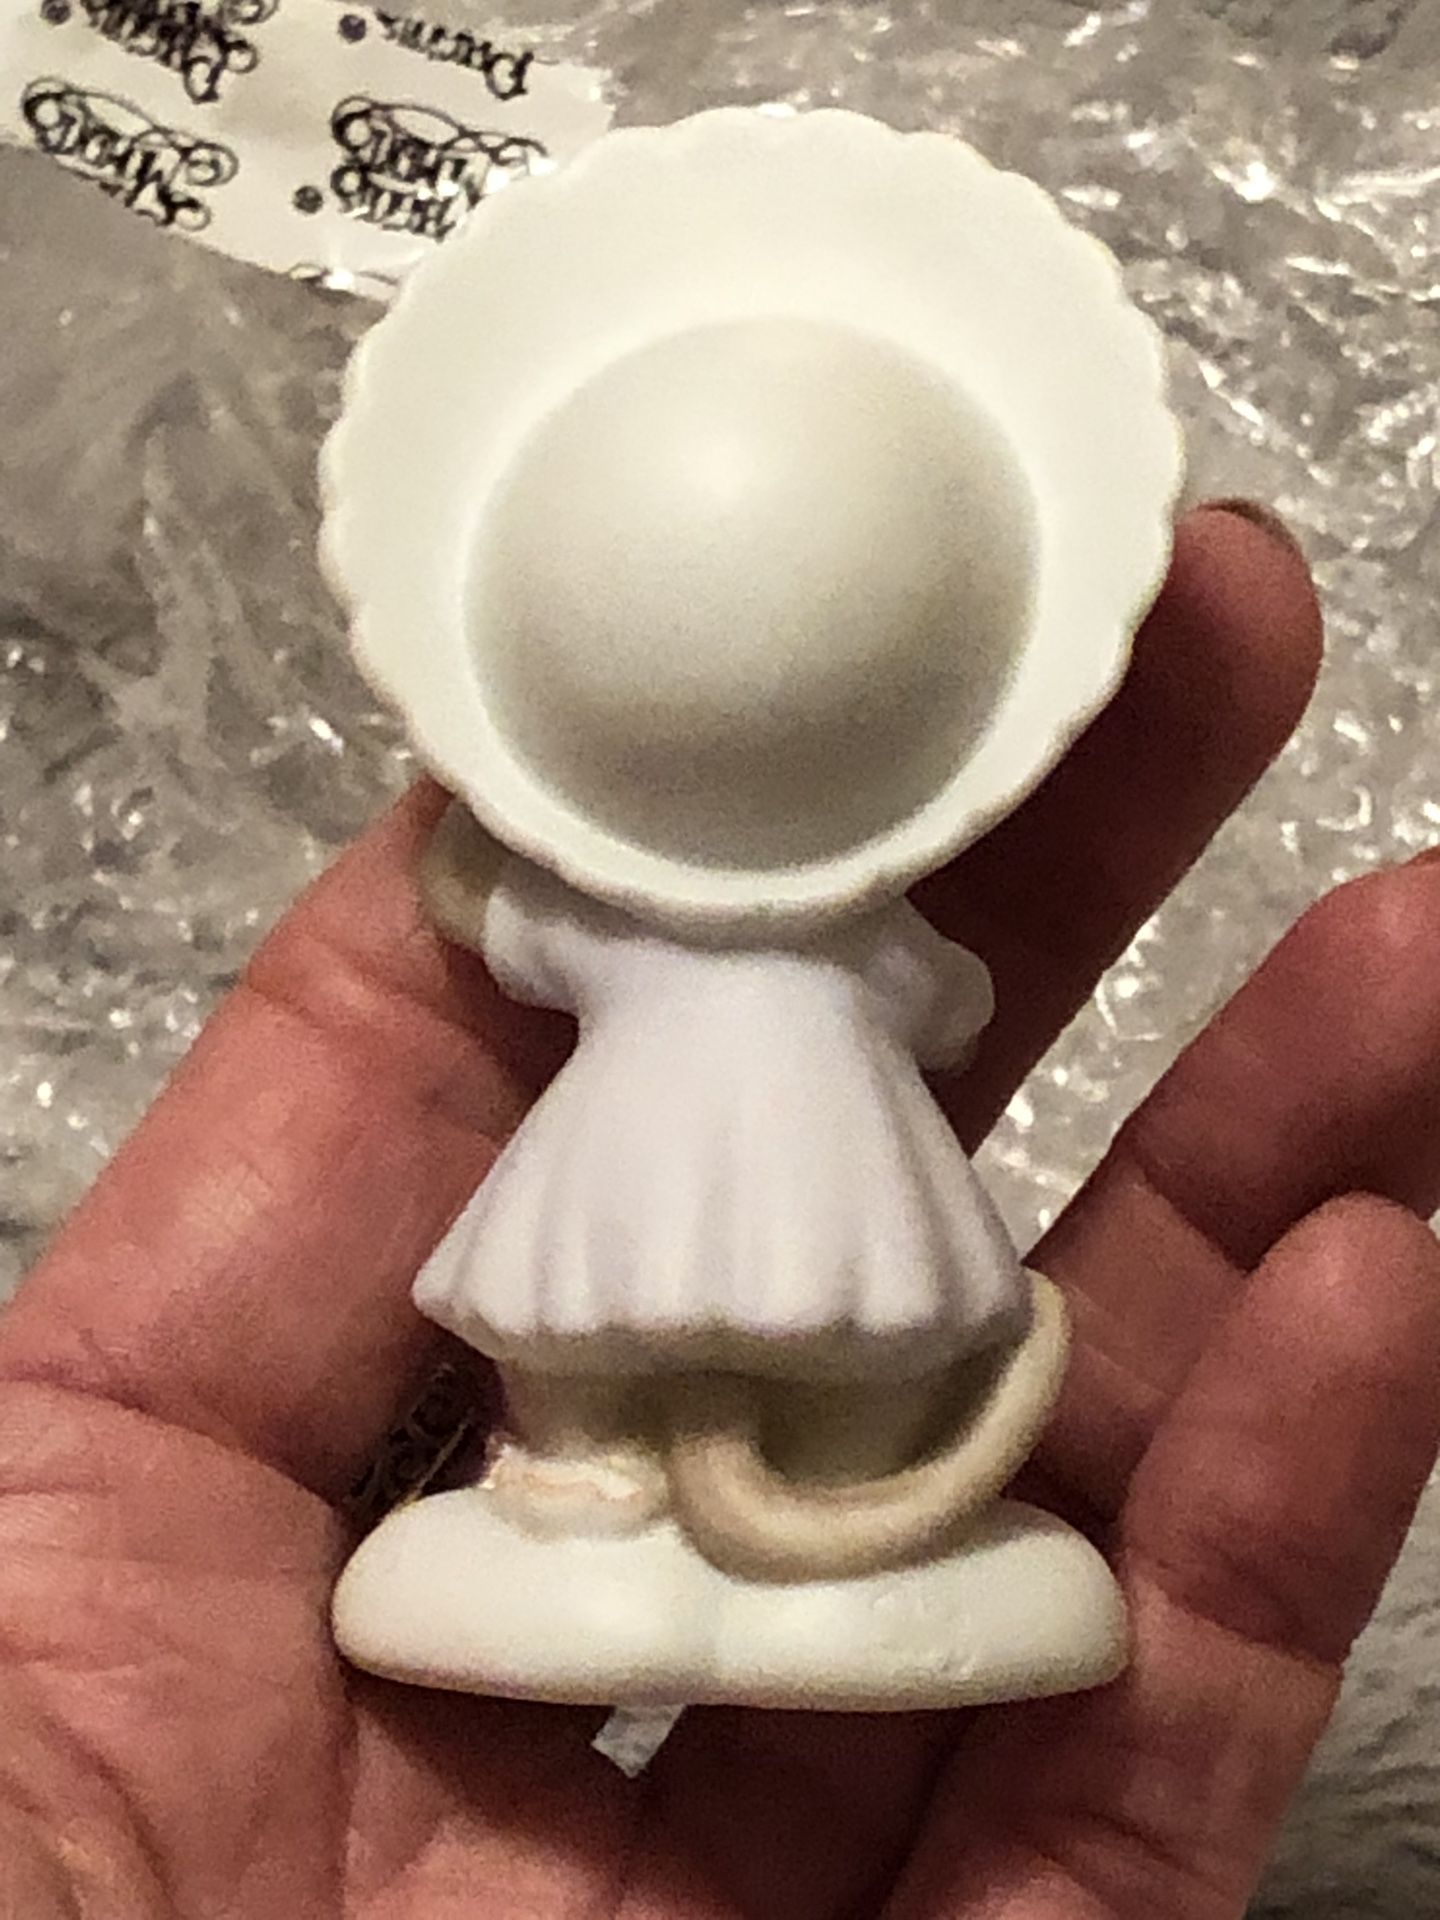 1991 “Love Pacifies” Precious Moments Collection Figurine